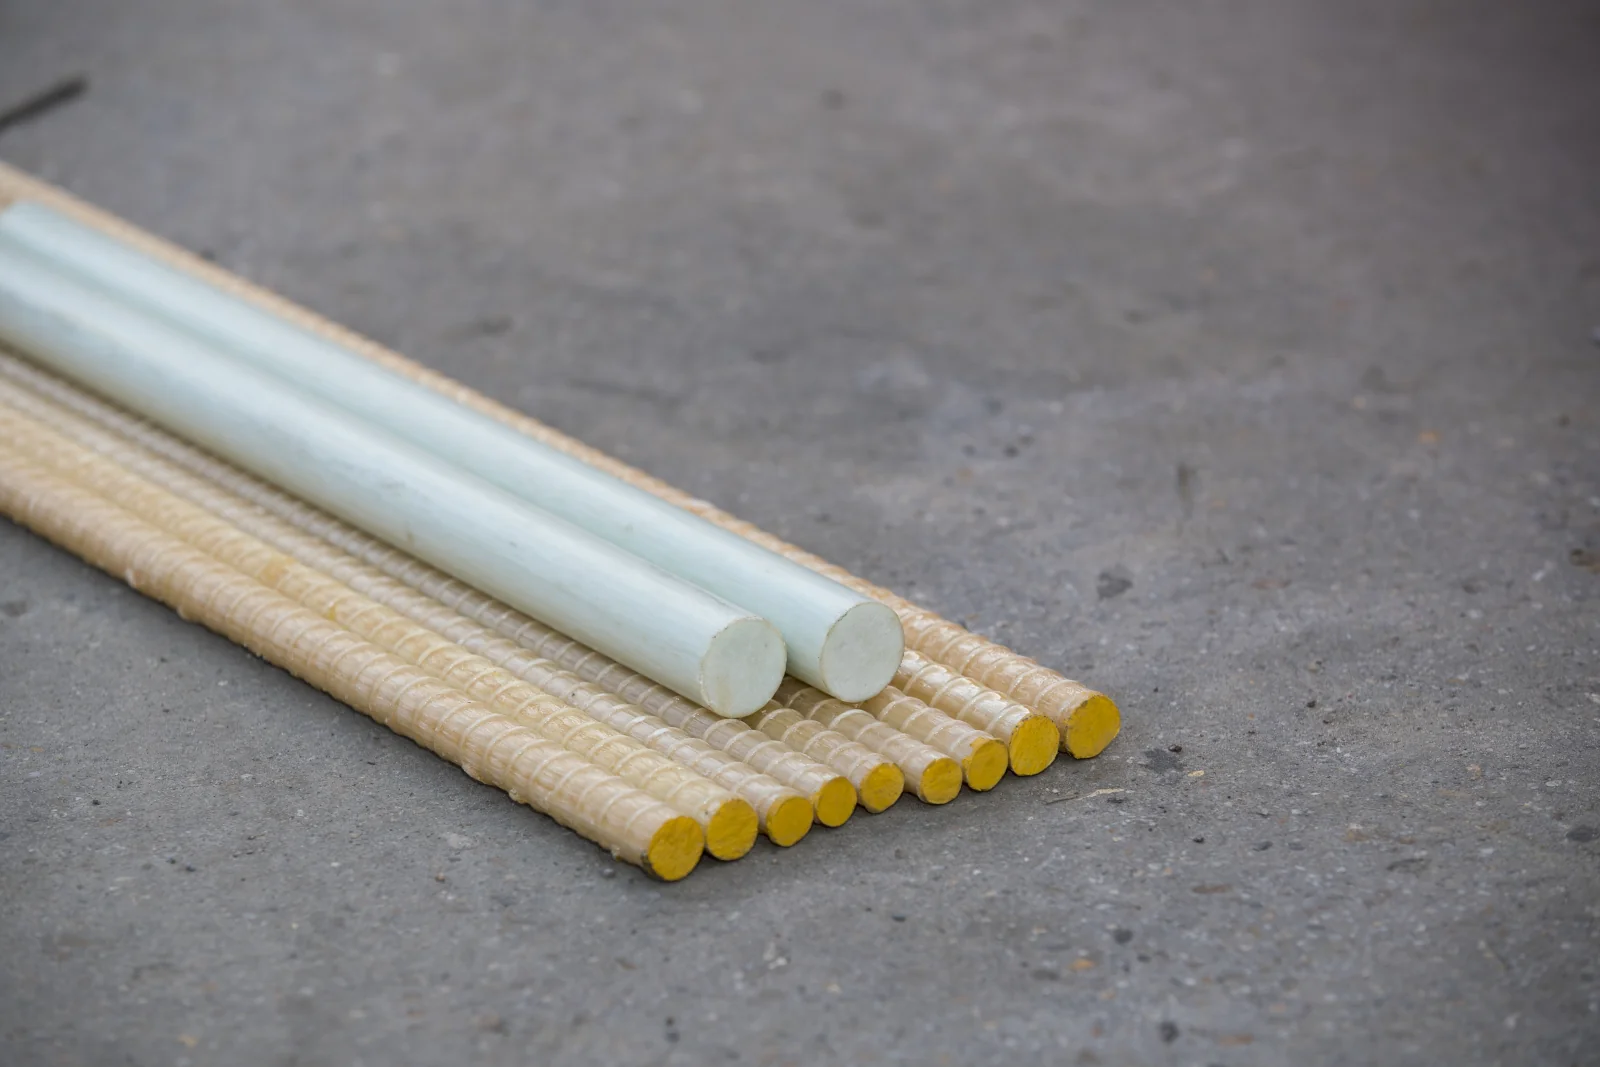 Fiber Dowels - Blog - What are the developments in the road construction market?